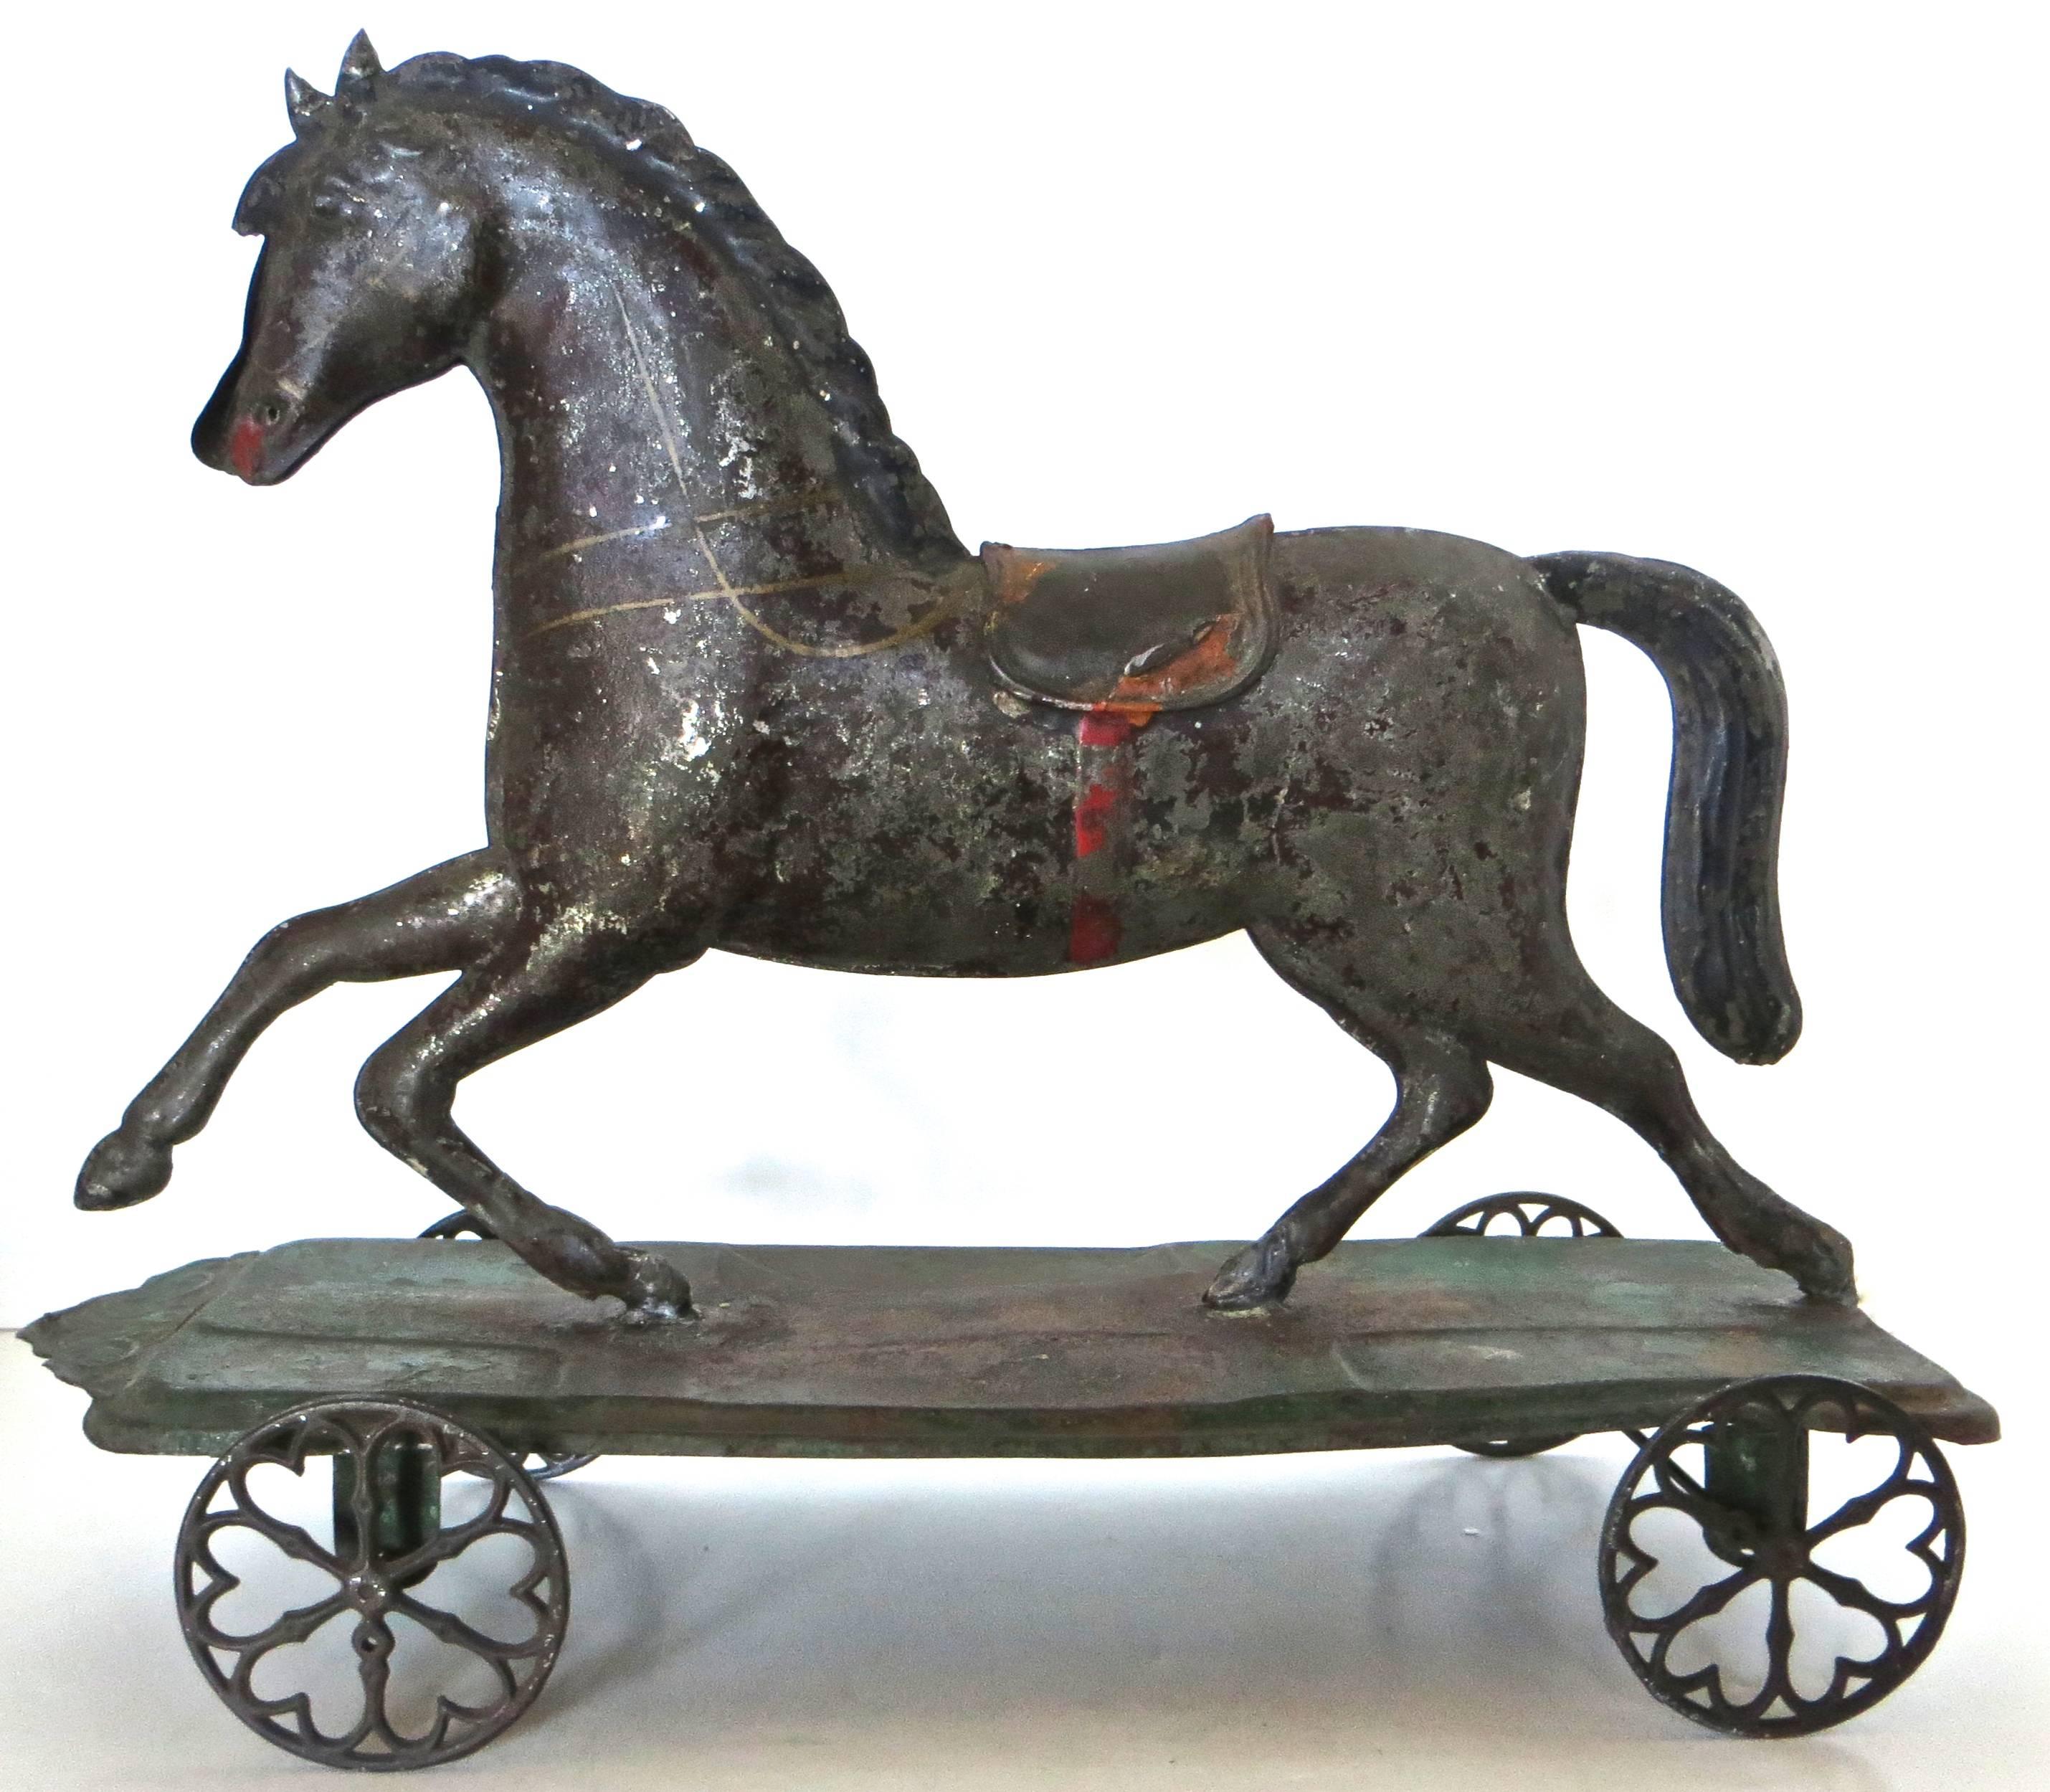 Toys of this nature would have been made for children to drag around the floor by a string (note the small hole in front of the platform), or pushed along and played with on the floor. This American tin platform horse pull toy (also referred to as a